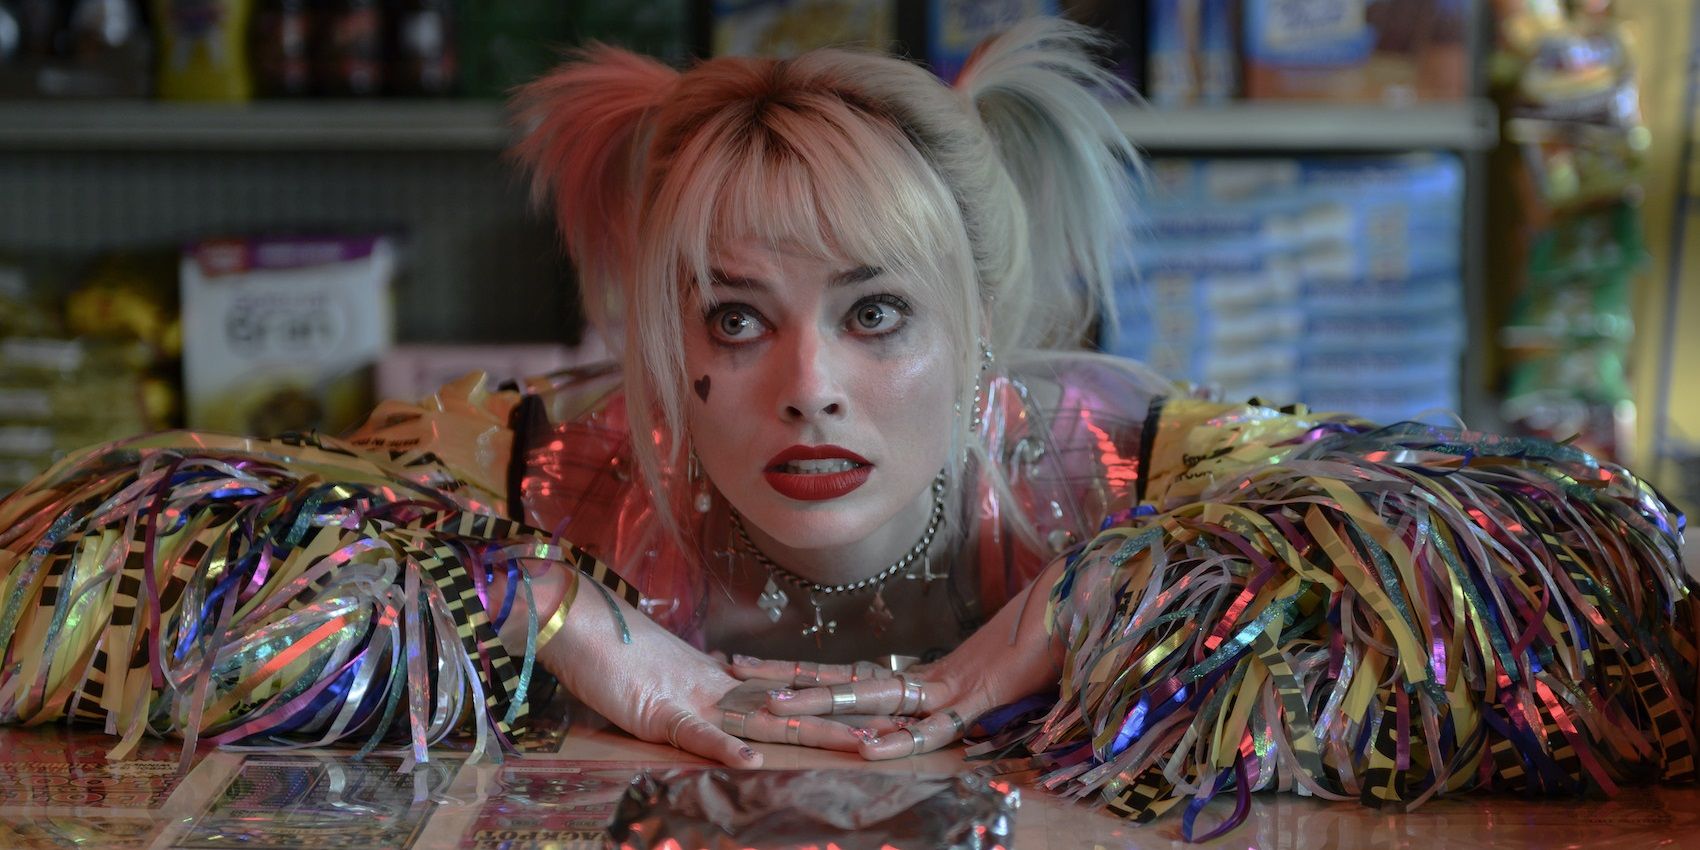 Suicide Squad Harley Quinn buys a breakfast sandwich in Birds of Prey